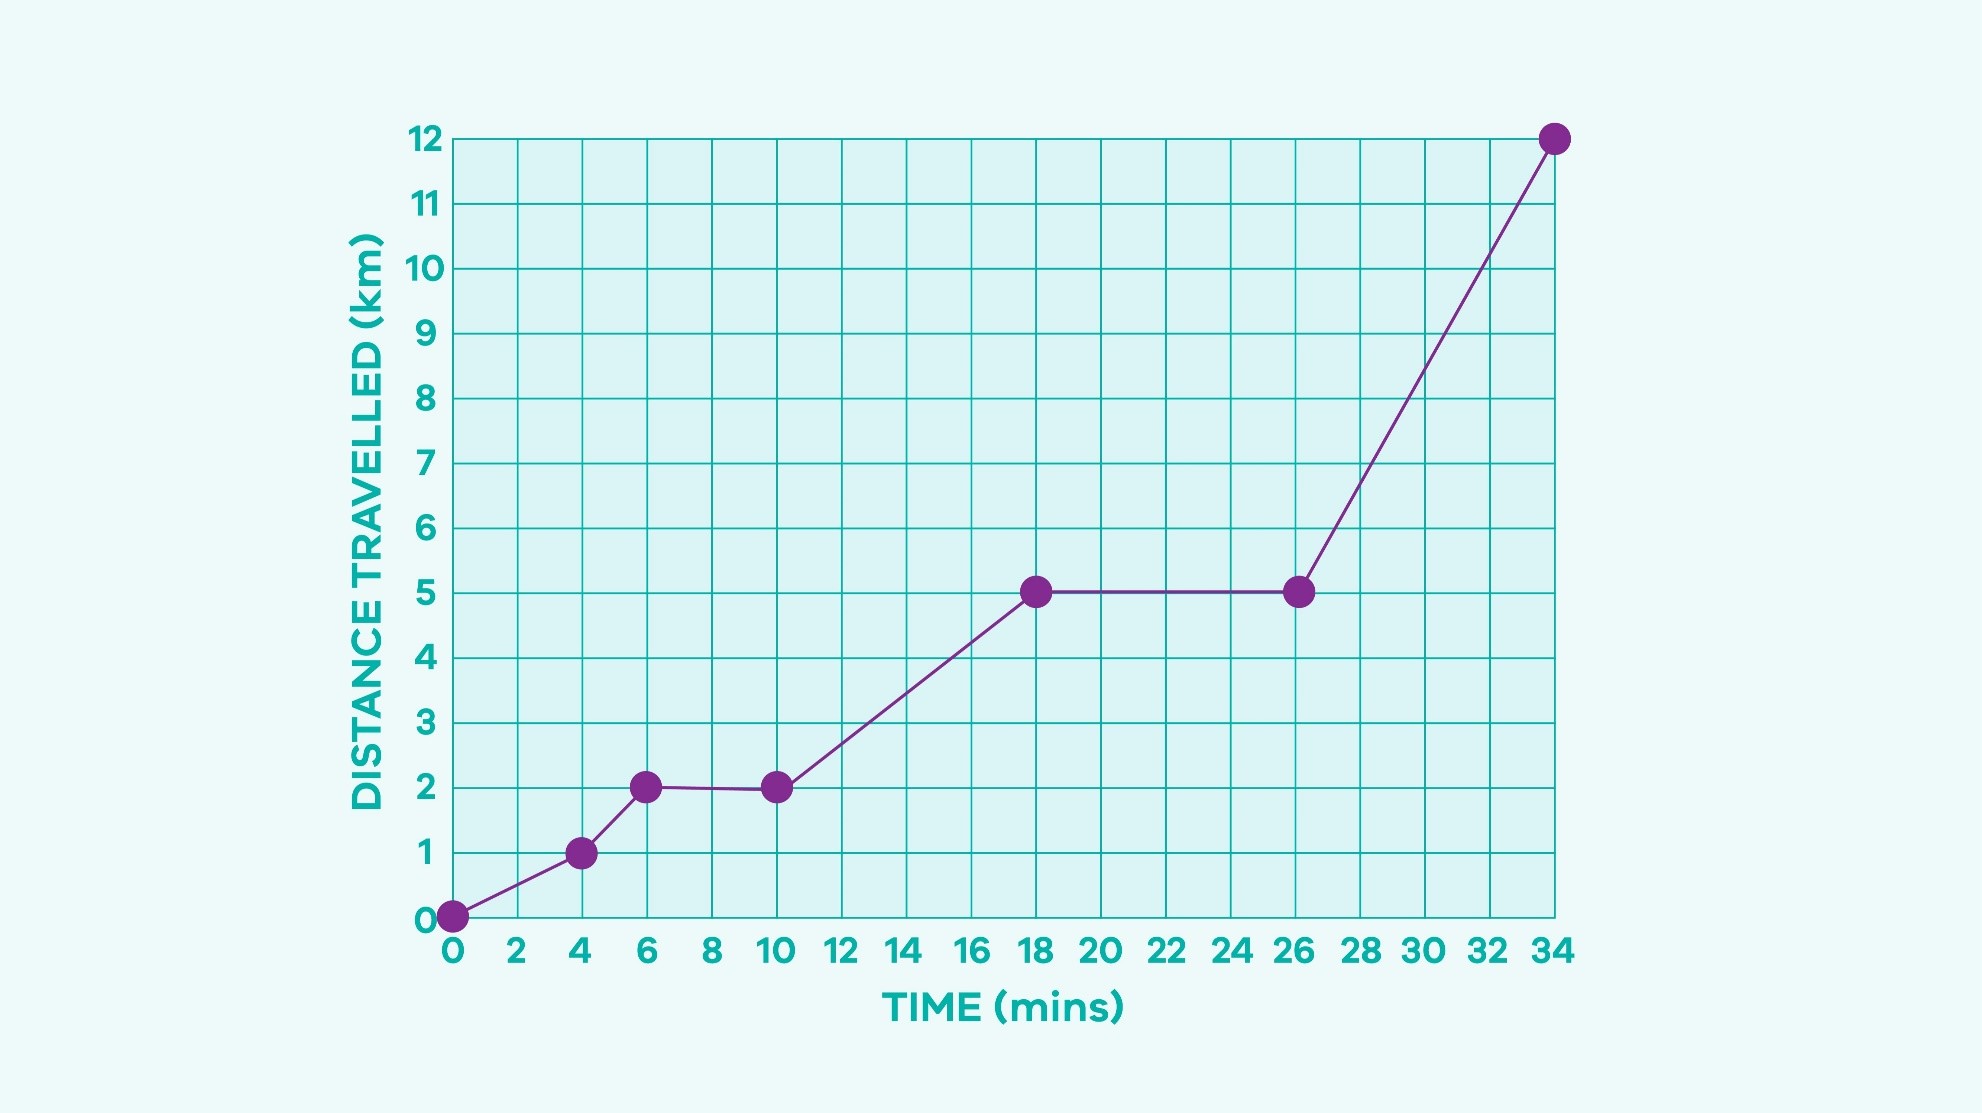 This is a simple graph that shows distance travelled in kilometres versus time in minutes. 